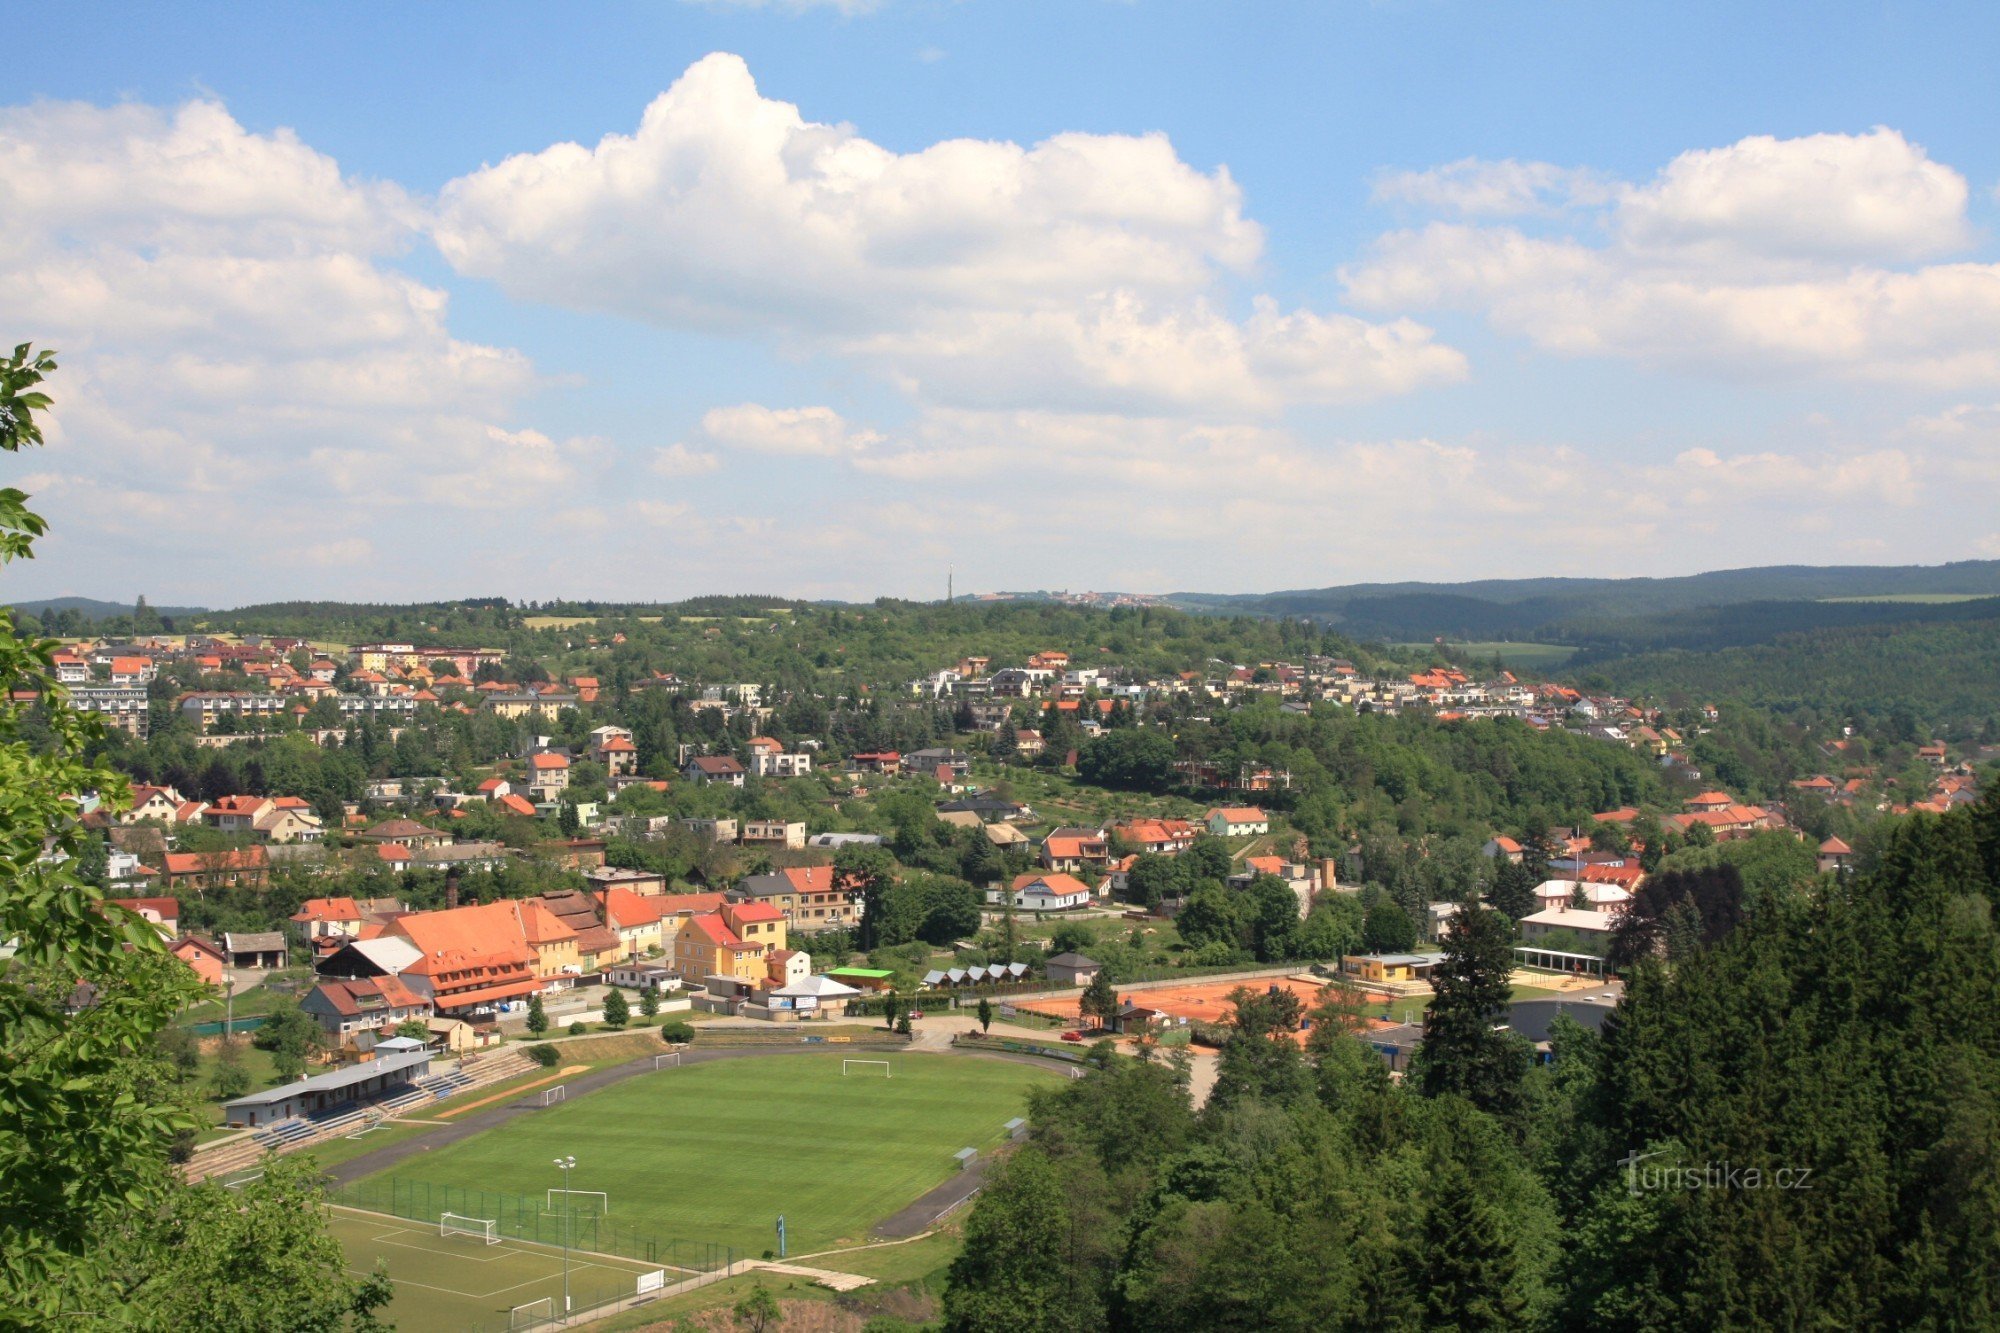 View from the gazebo on the eastern part of Boskovice and the top part of Drahanská vrchovina